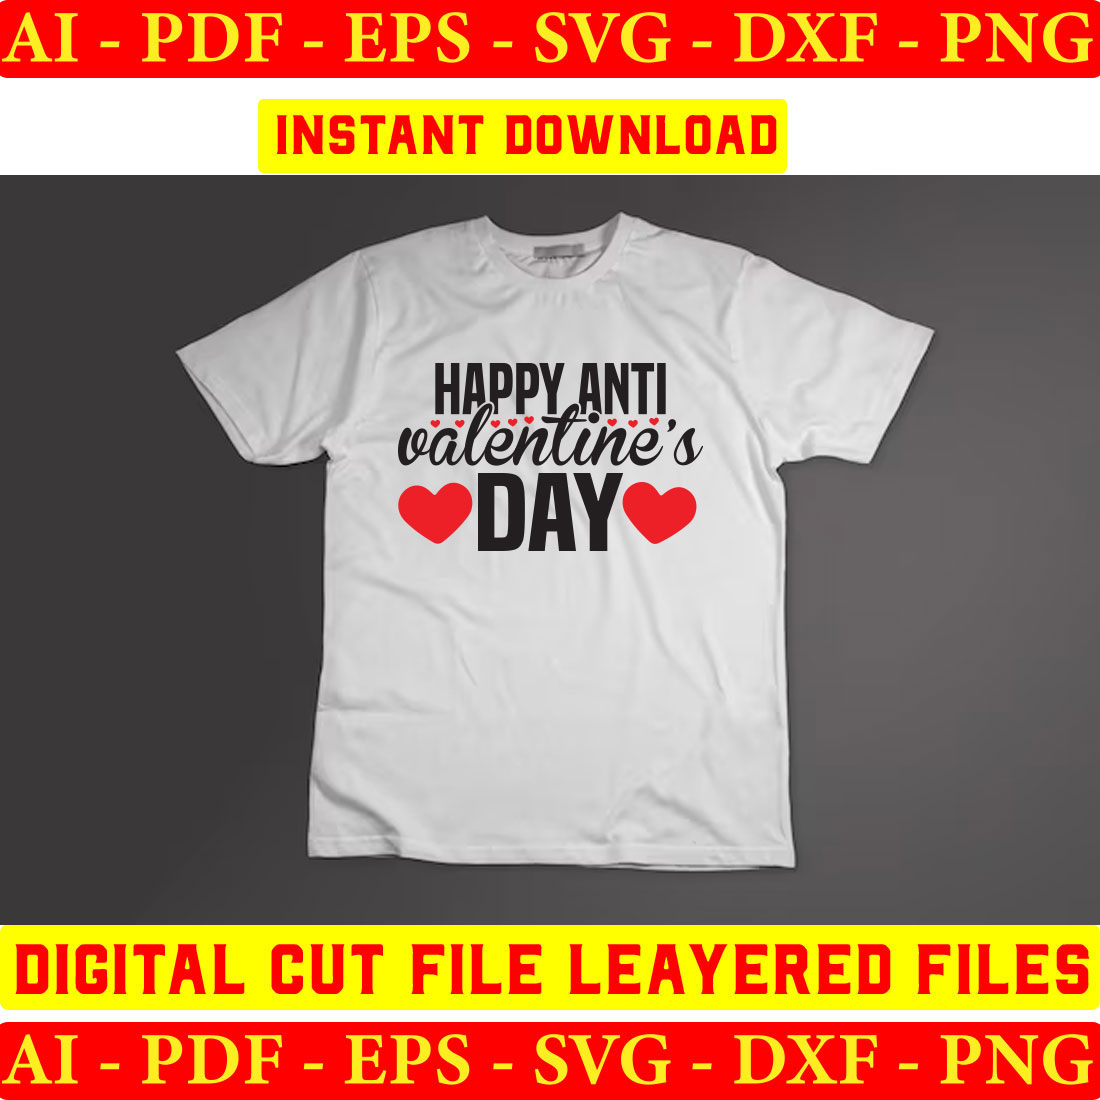 T - shirt with the words happy valentine's day printed on it.